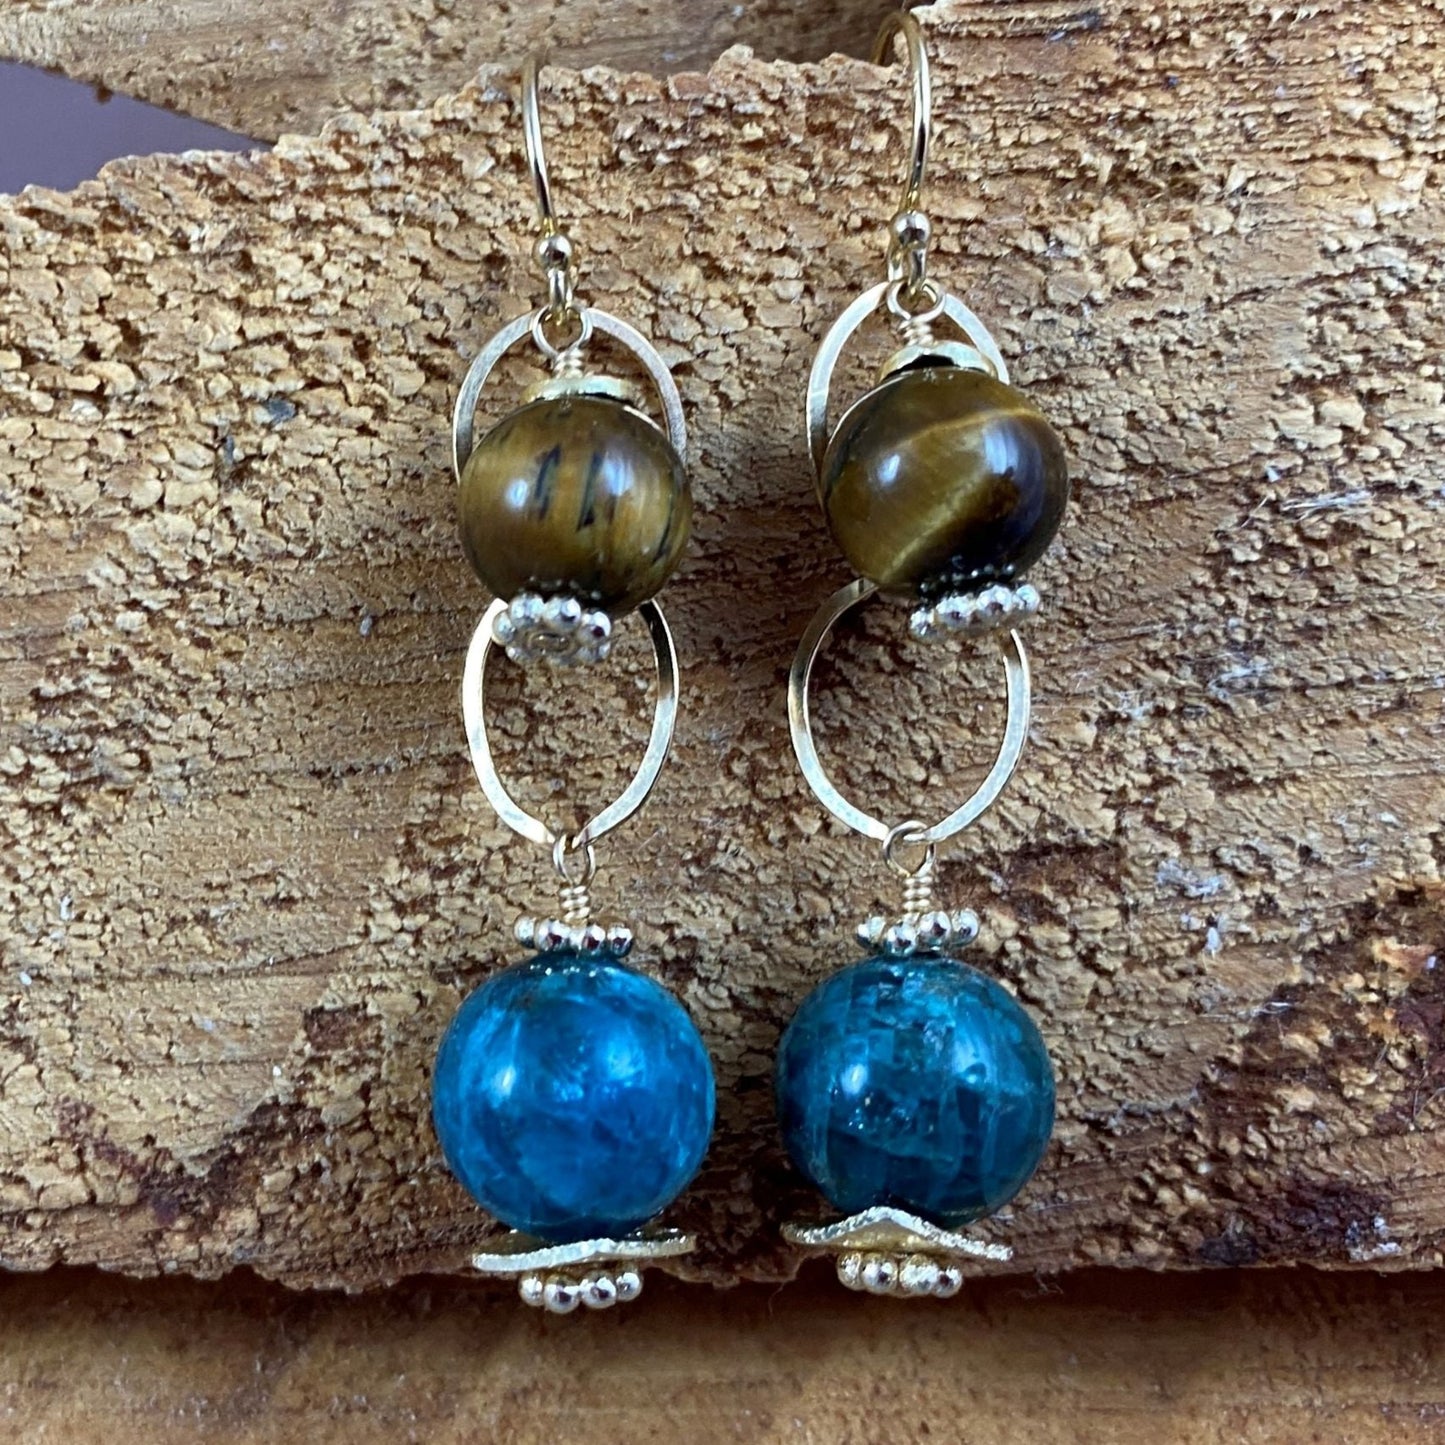 Pair of Gold Fill Earrings With Tiger's Eye and Apatite